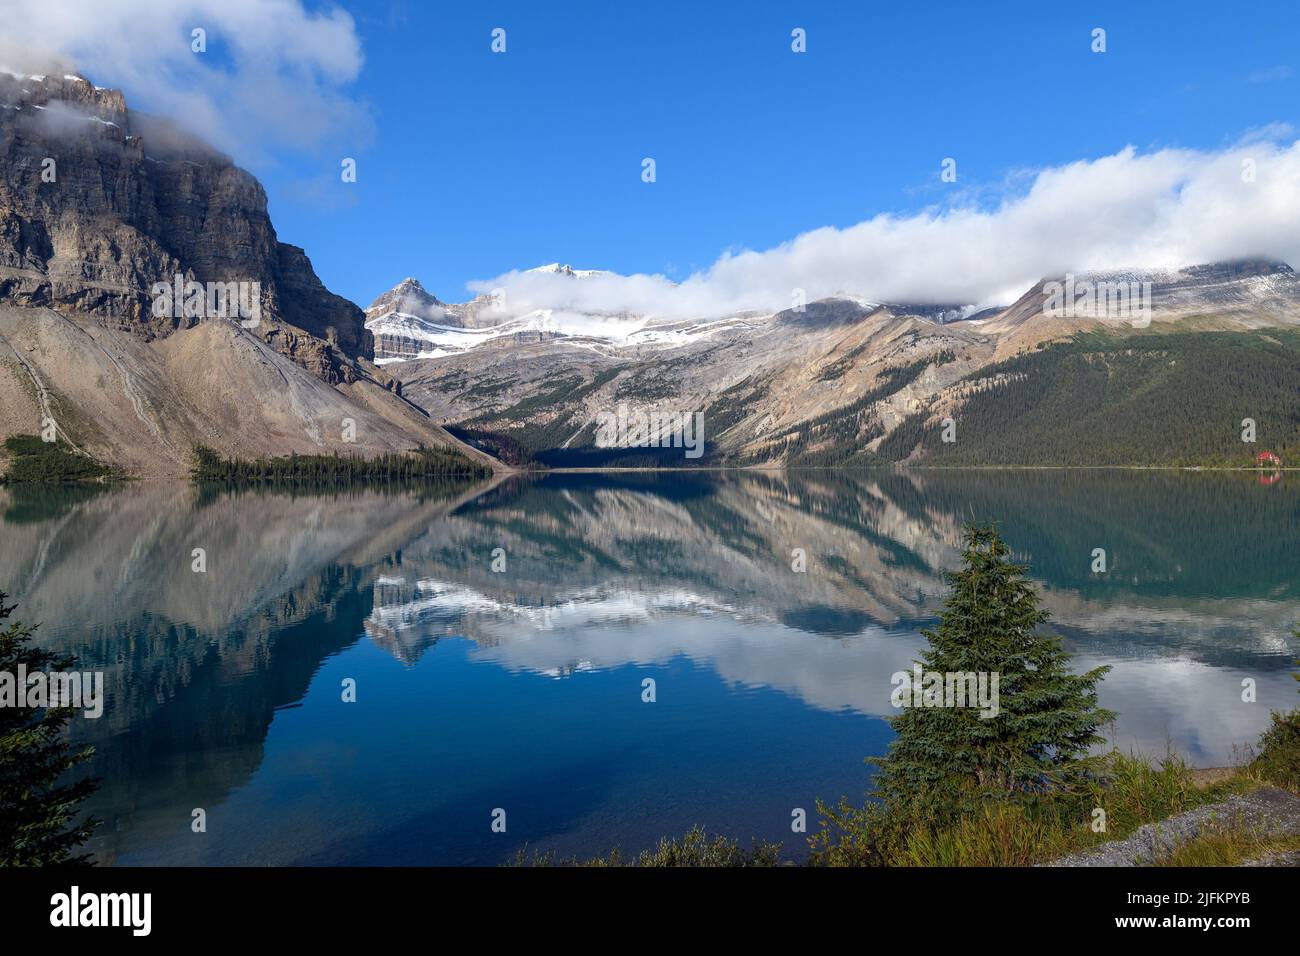 Scenic view of Bow Lake with a reflection of the mountains on the Icefields Parkway in Banff National Park and Jasper National Park. Stock Photo